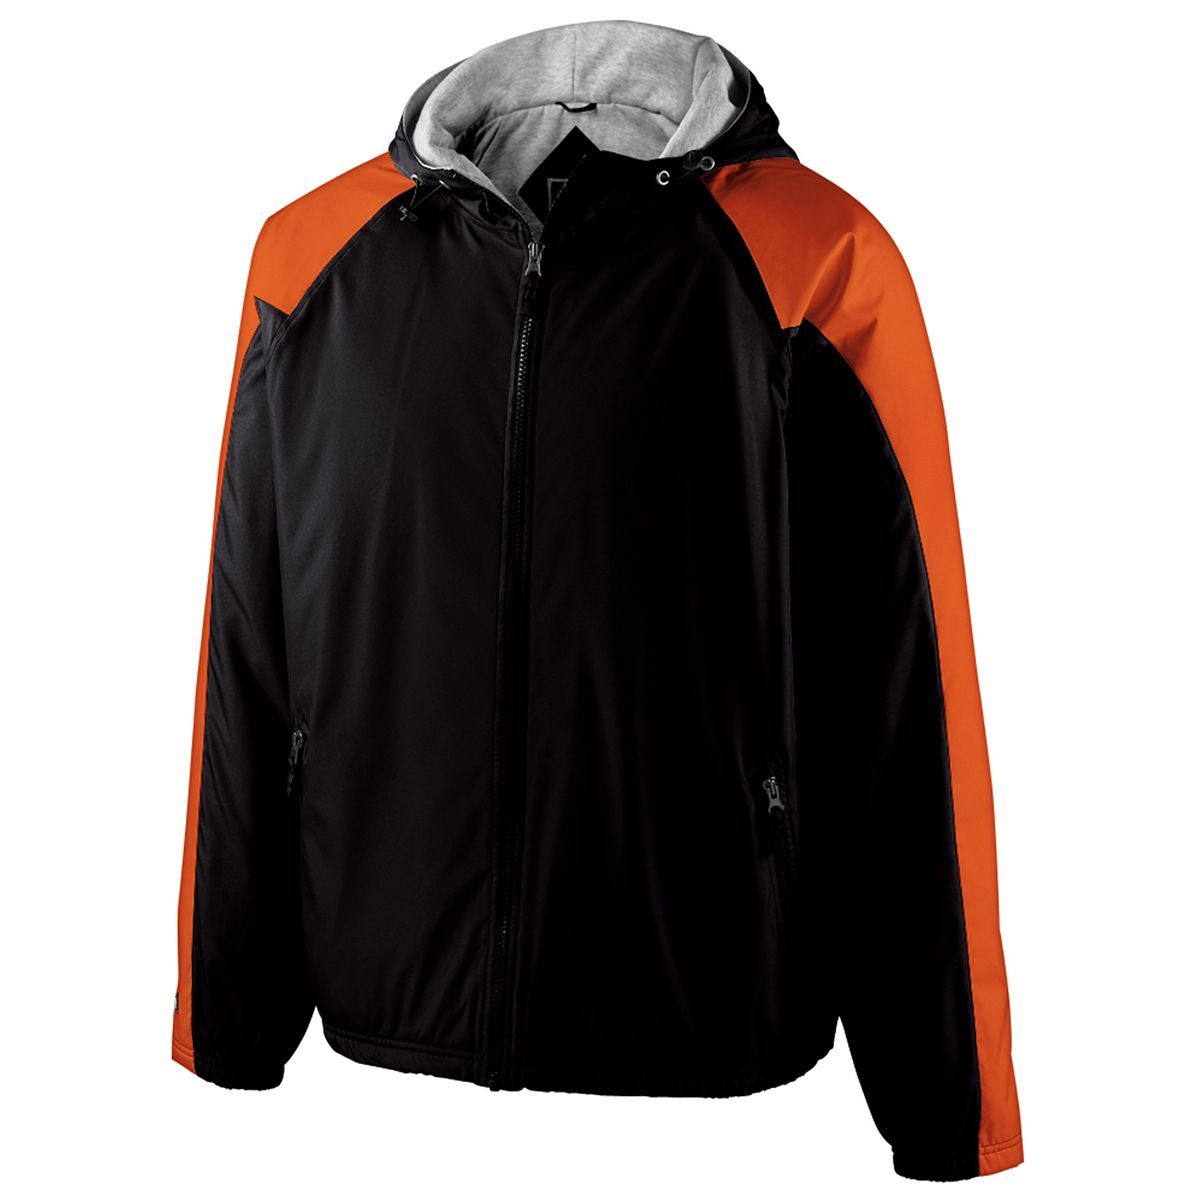 Holloway Homefield Jacket in Black/Orange  -Part of the Adult, Adult-Jacket, Holloway, Outerwear product lines at KanaleyCreations.com